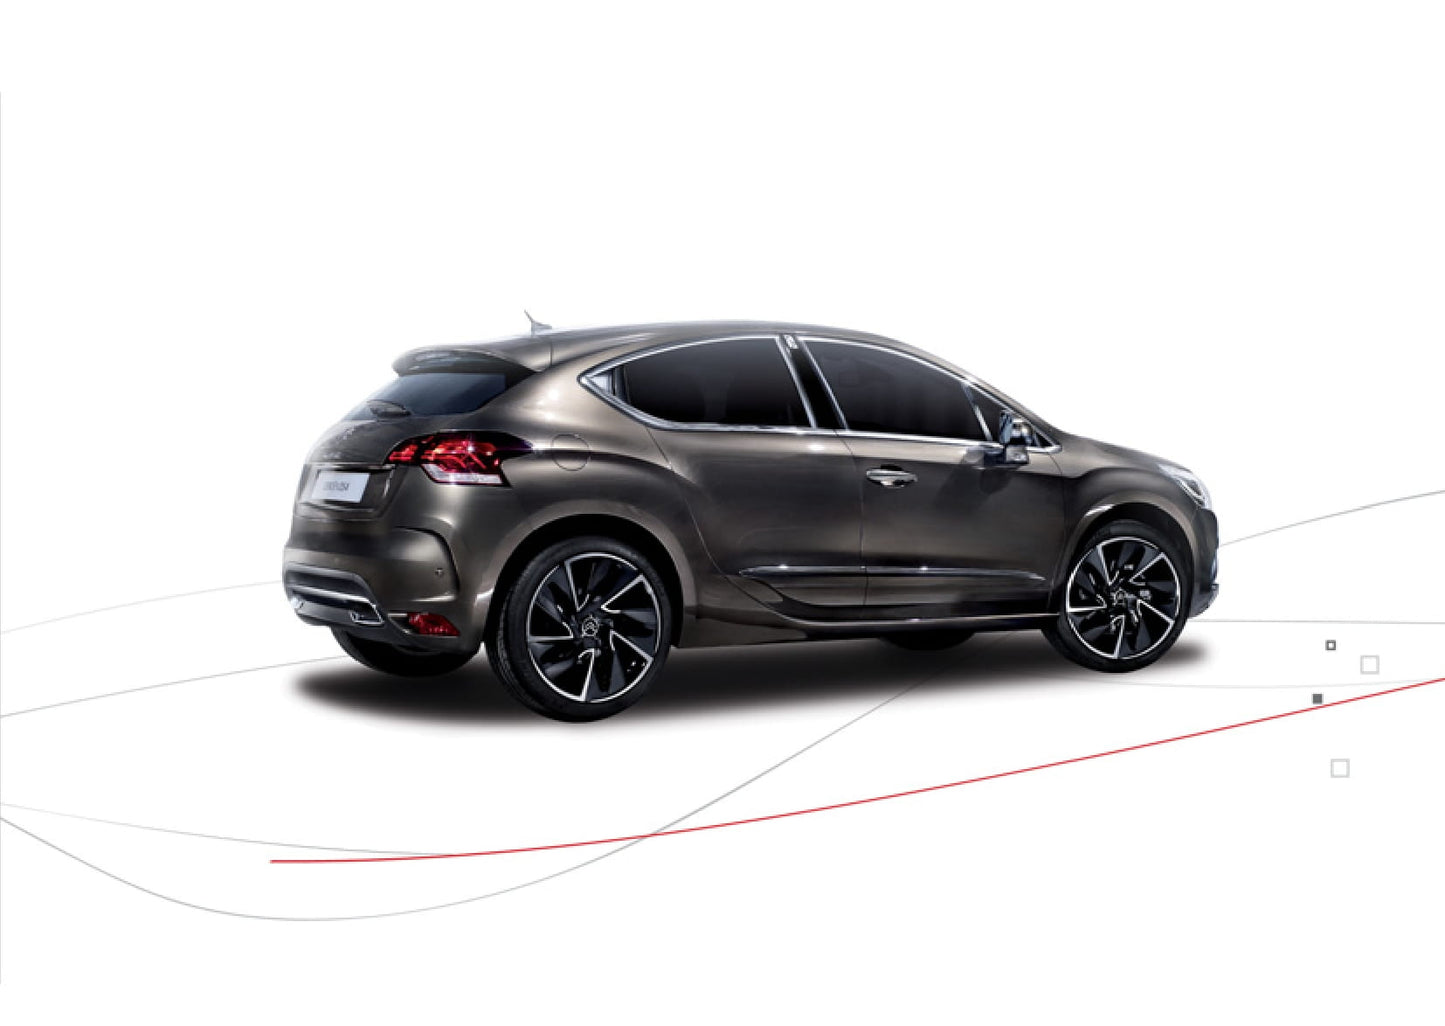 2011 Citroën DS4 Owner's Manual | English